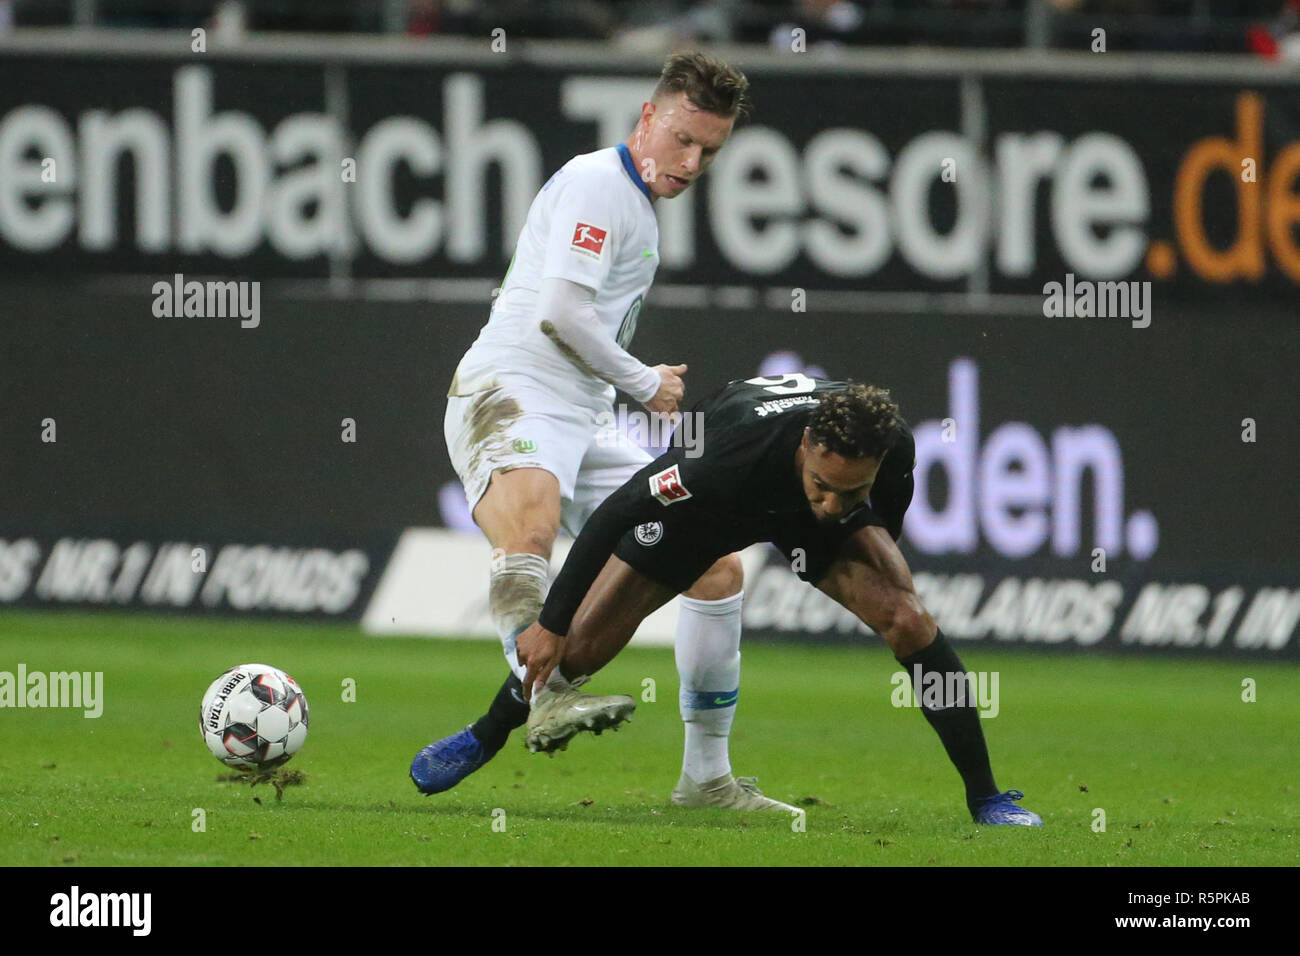 Hessen, Germany. 2nd Dec 2018.  VfL Wolfsburg, 13th matchday in the Commerzbank Arena. Frankfurt's Jonathan de Guzman (r) and Wolfsburg's Yannick Gerhardt in action. Photo: Thomas Frey/dpa - IMPORTANT NOTE: In accordance with the requirements of the DFL Deutsche Fußball Liga or the DFB Deutscher Fußball-Bund, it is prohibited to use or have used photographs taken in the stadium and/or the match in the form of sequence images and/or video-like photo sequences. Credit: dpa picture alliance/Alamy Live News Credit: dpa picture alliance/Alamy Live News Credit: dpa picture alliance/Alamy Live News C Stock Photo